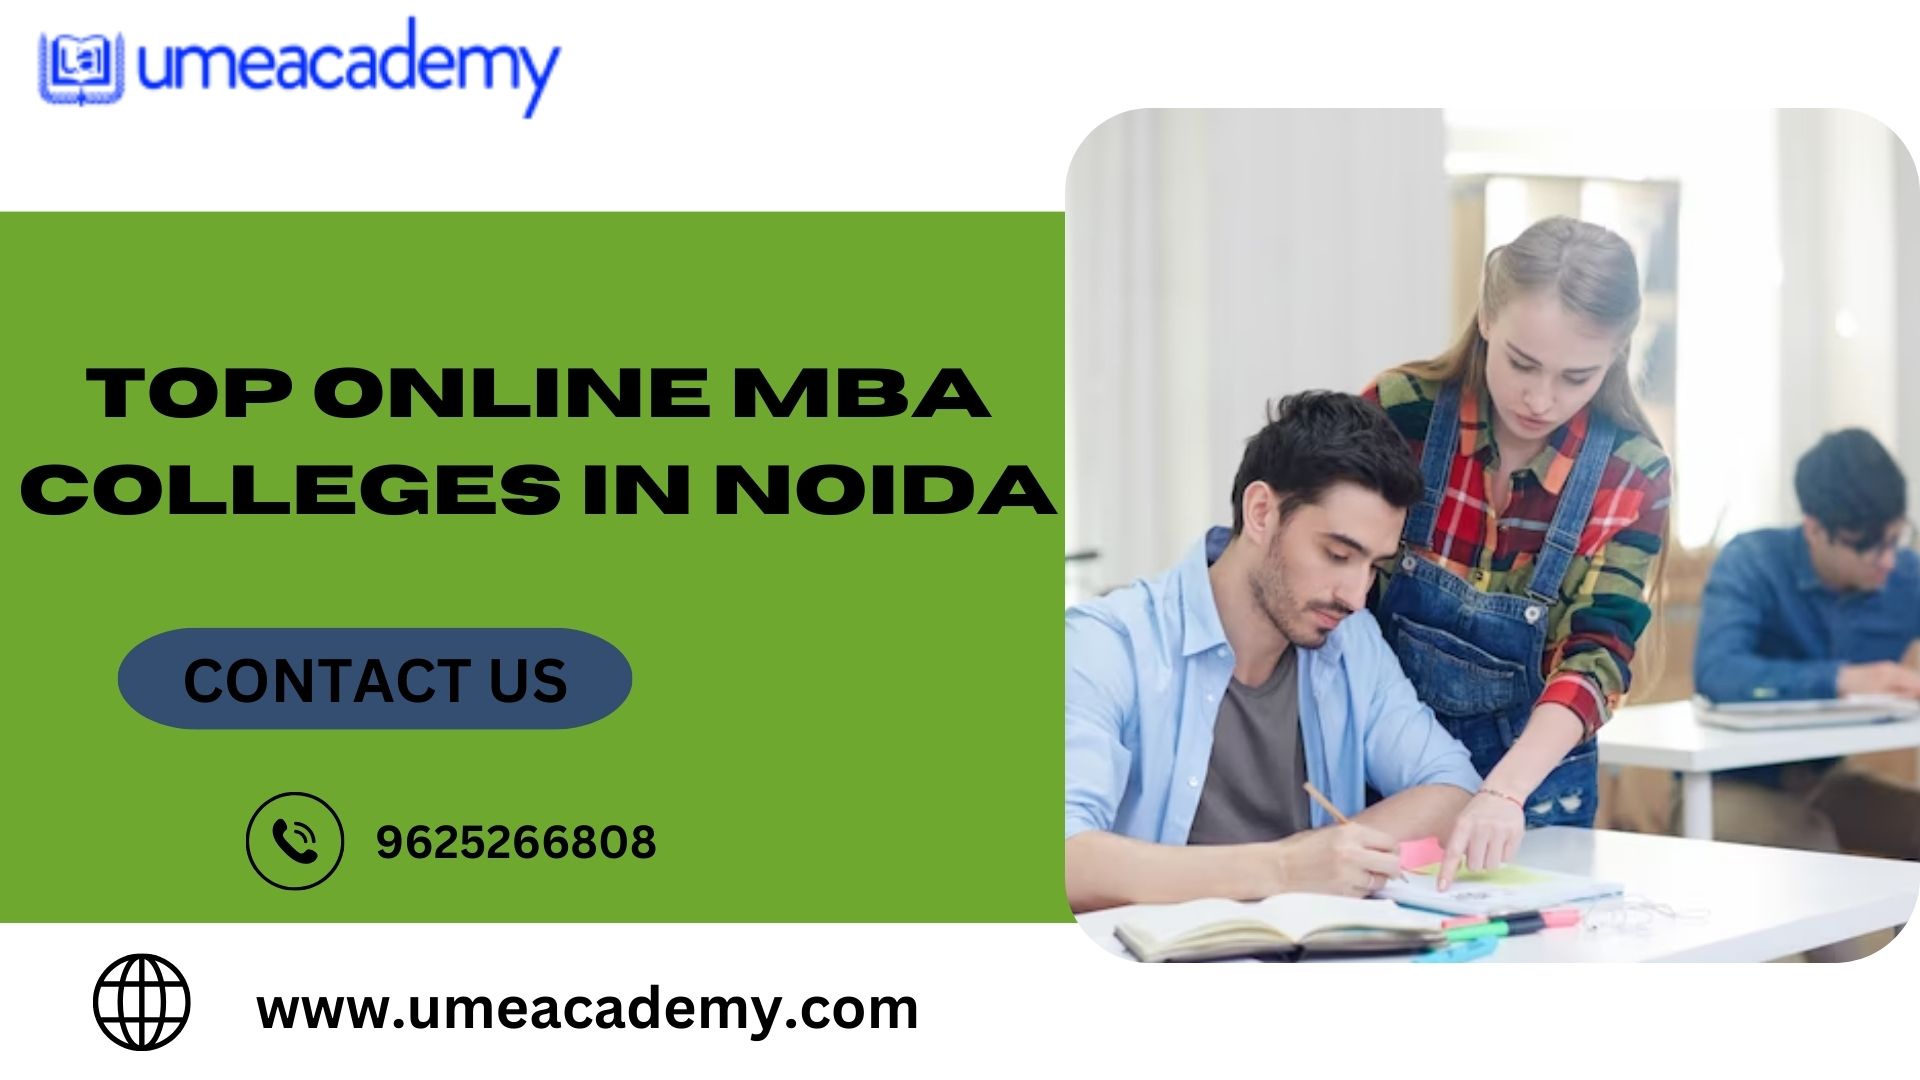 Top Online MBA Colleges in Noida - Globe Growing Solutions is now ...